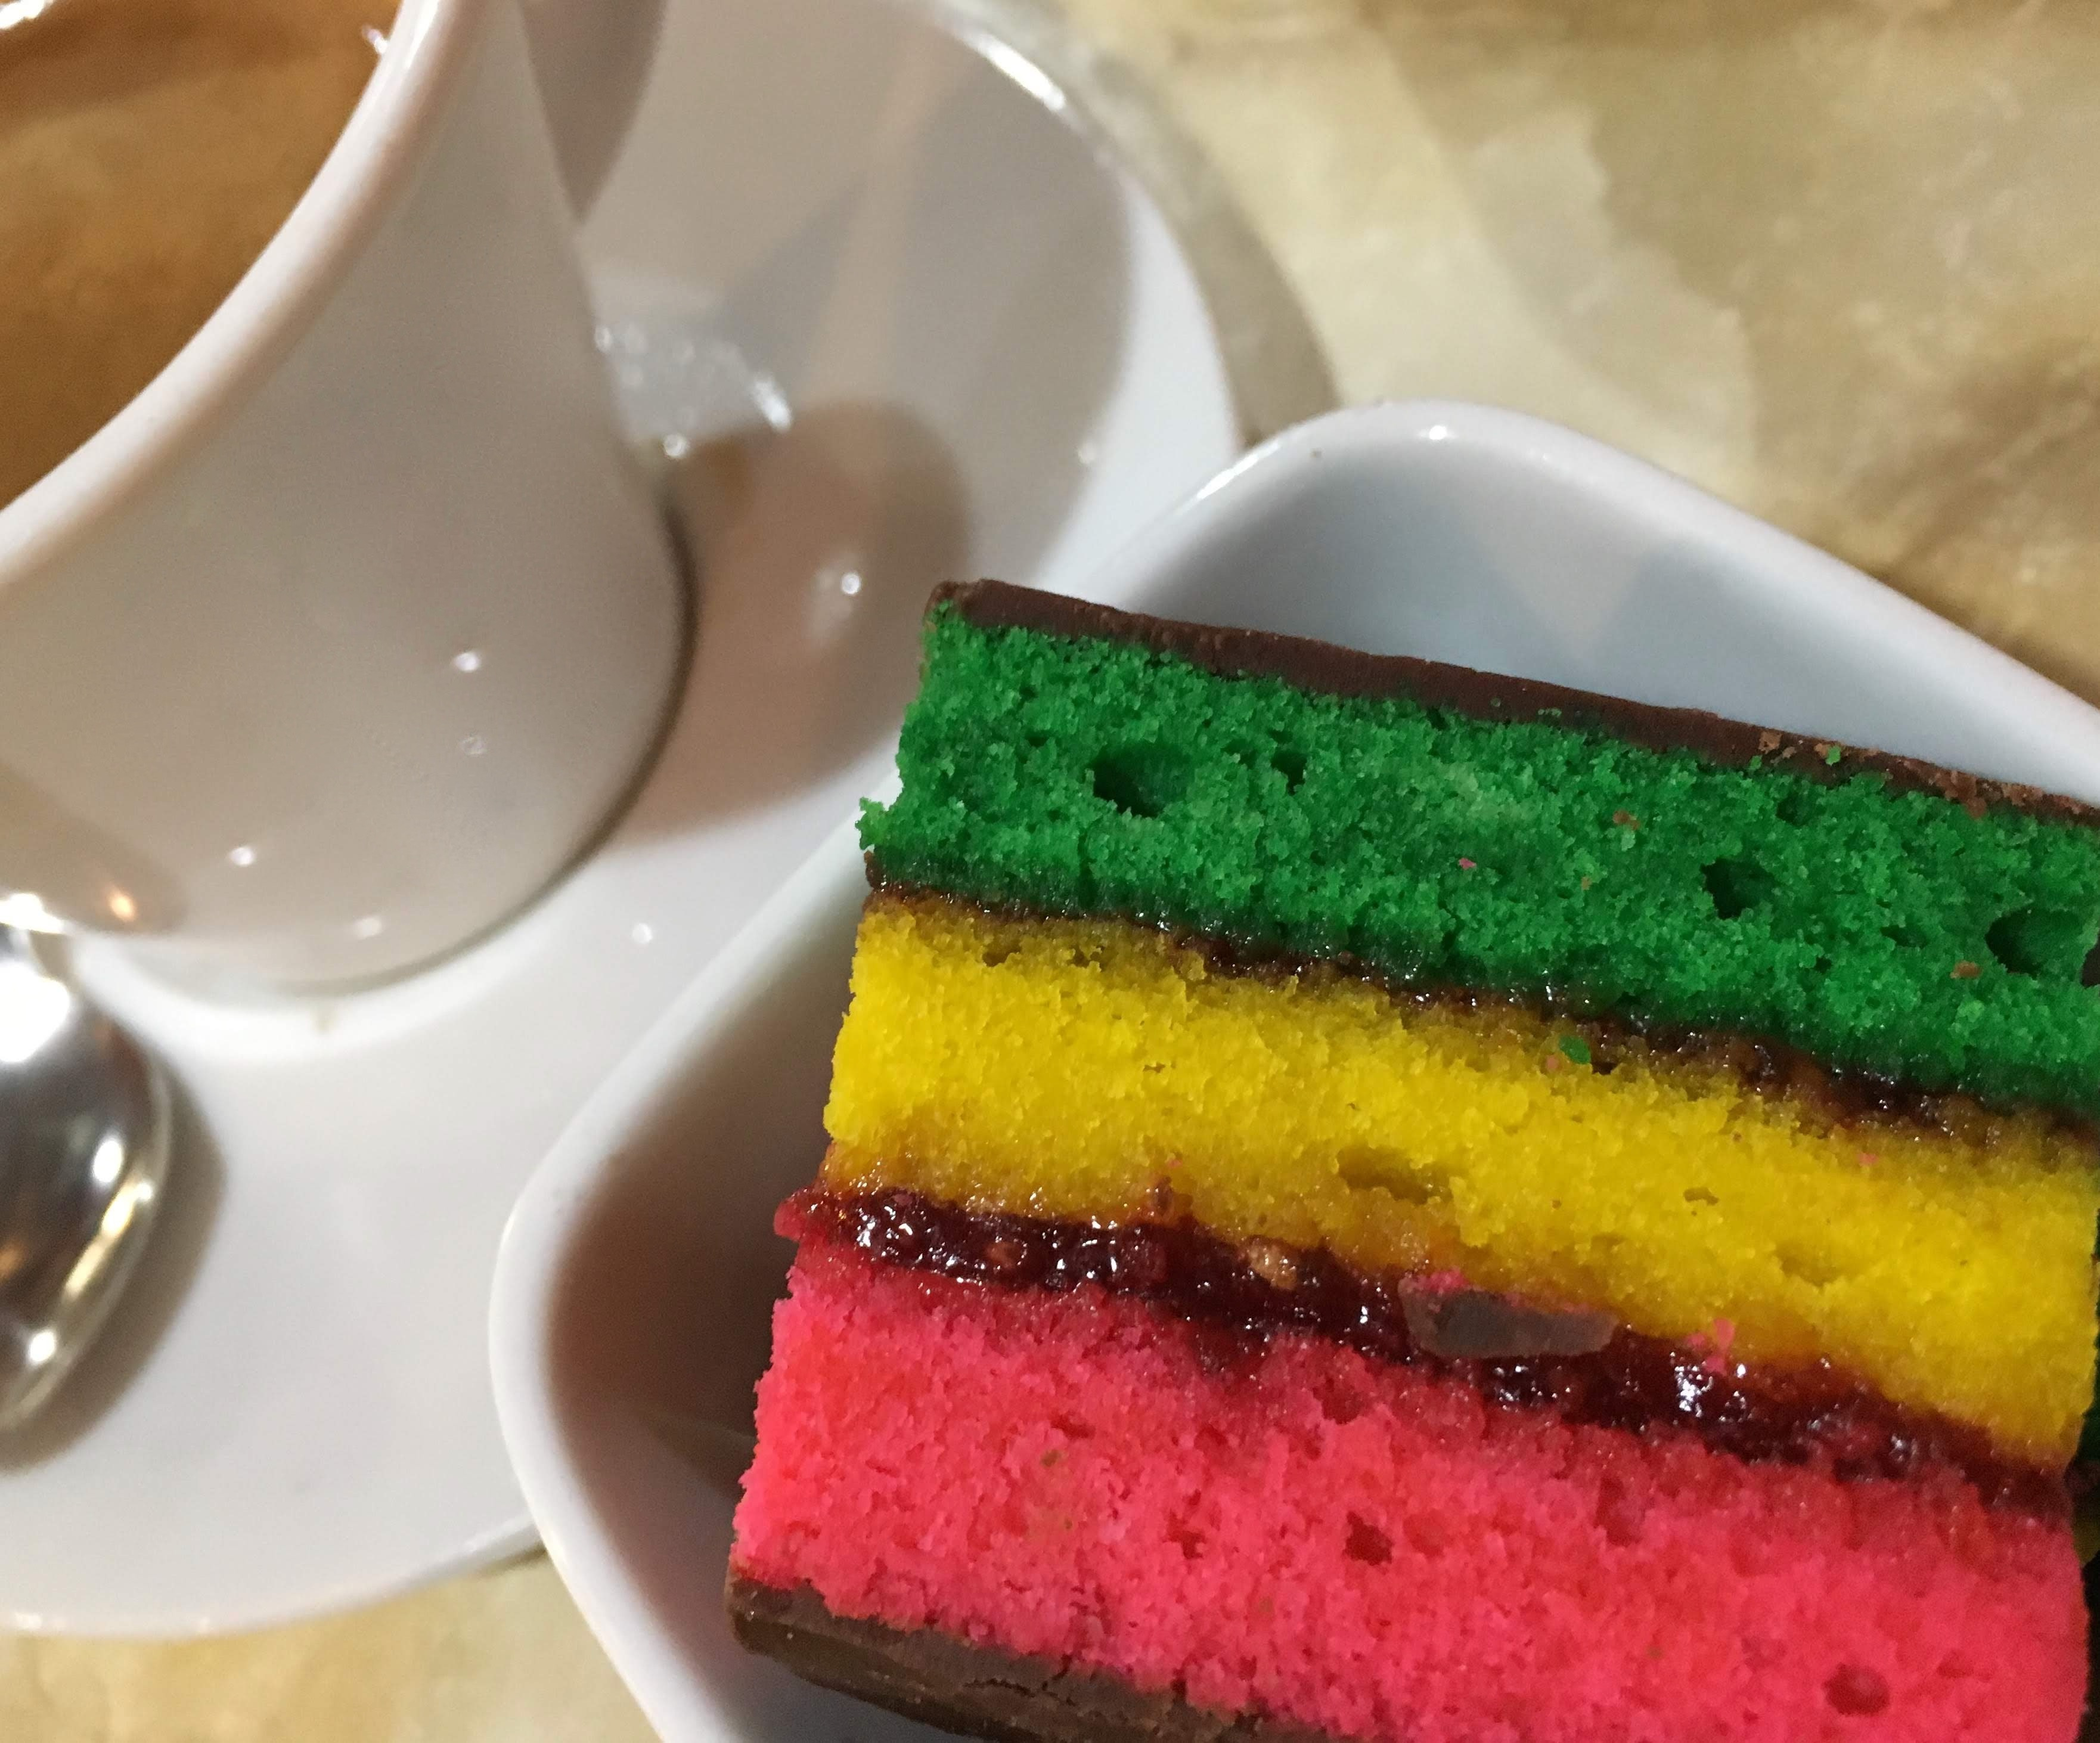 Slice of rainbow cake next to a toppled coffee cup on a saucer